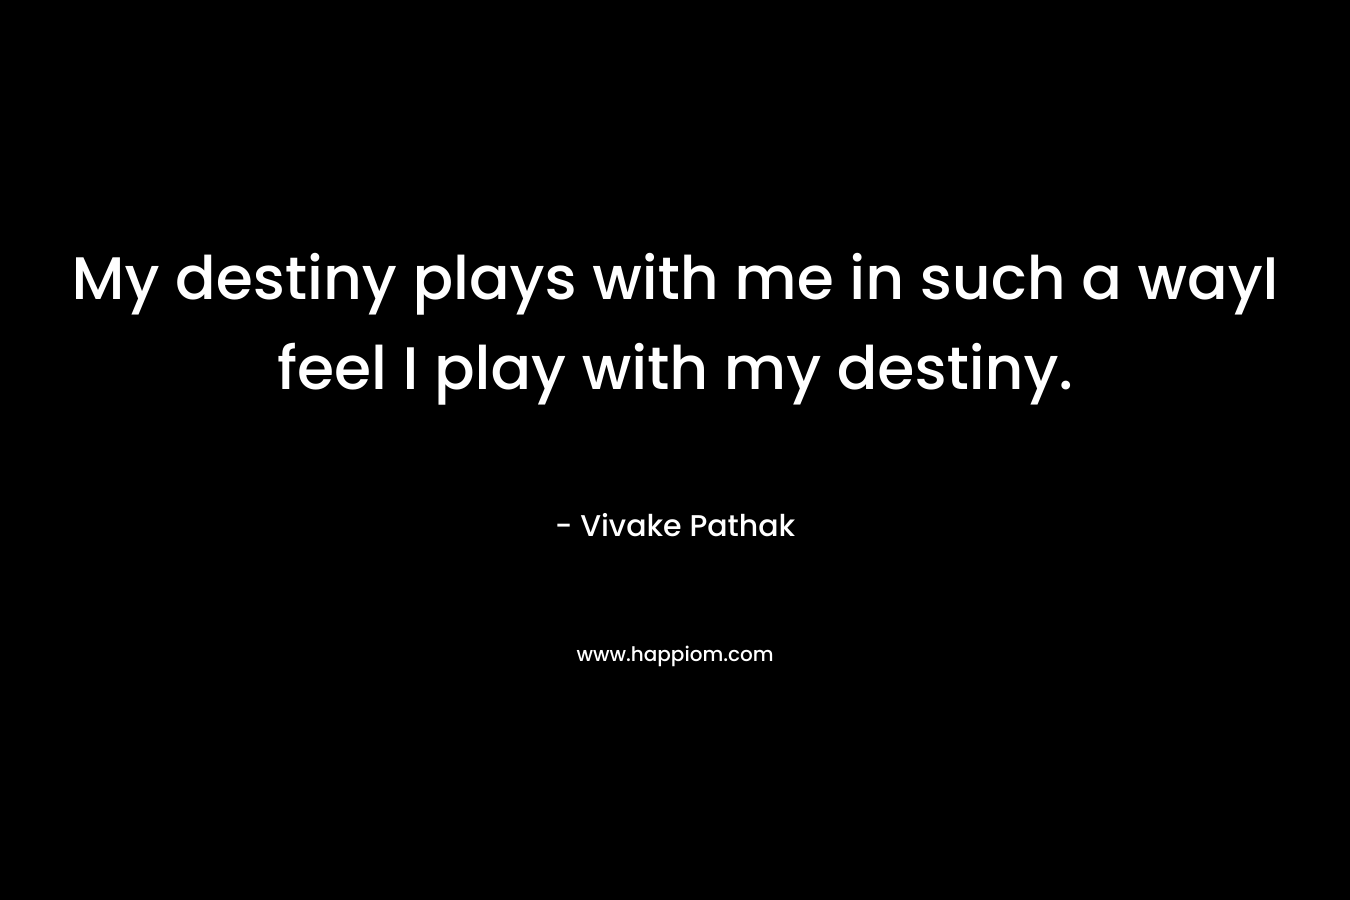 My destiny plays with me in such a wayI feel I play with my destiny.